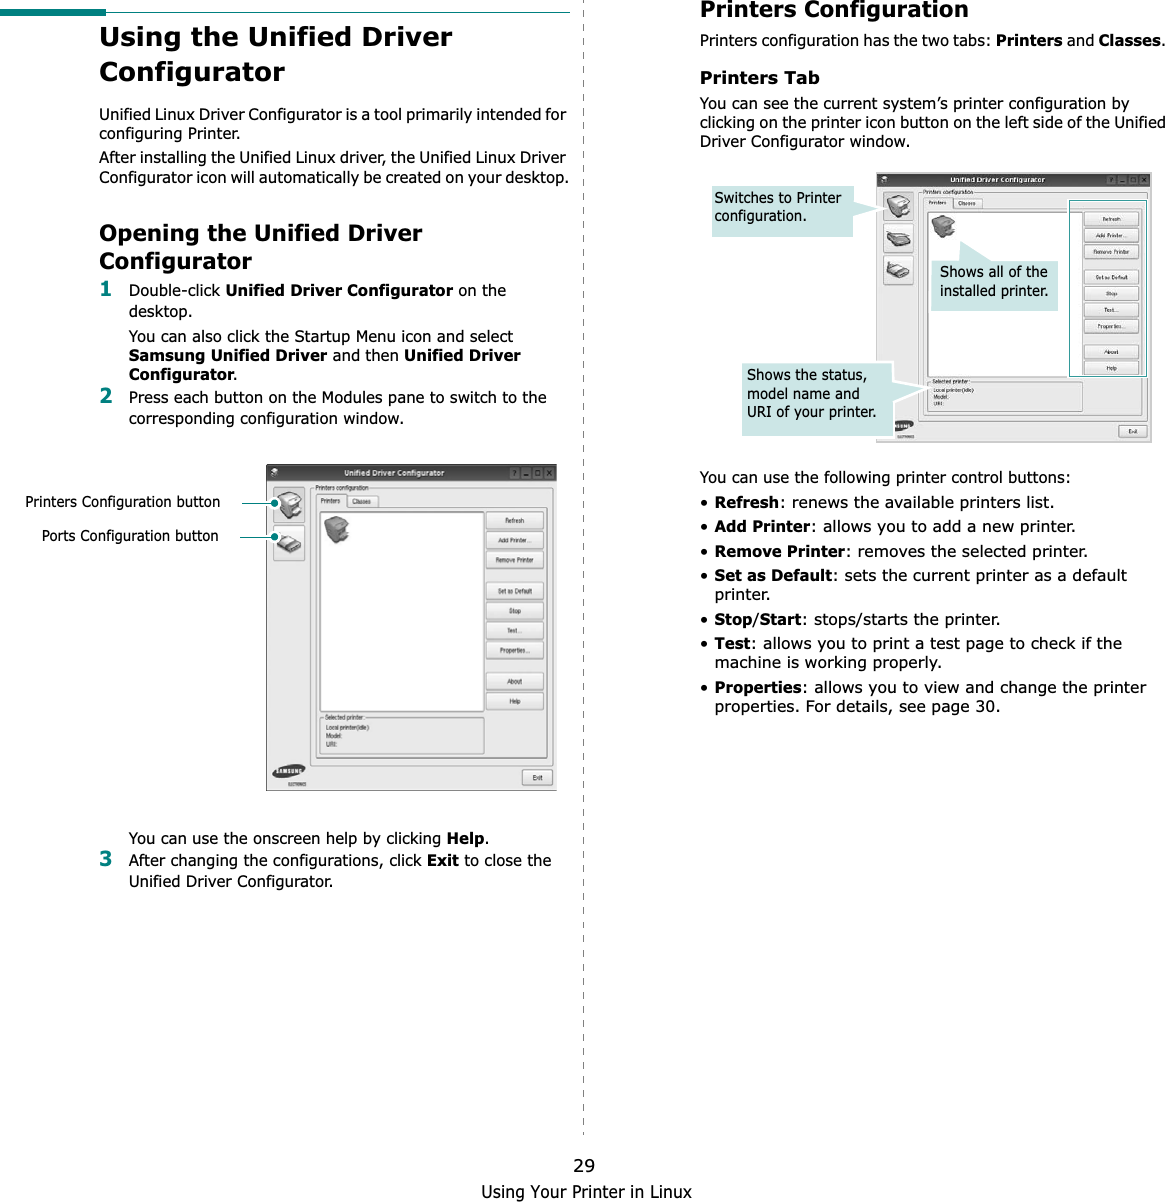 Using Your Printer in Linux29Using the Unified Driver ConfiguratorUnified Linux Driver Configurator is a tool primarily intended for configuring Printer.After installing the Unified Linux driver, the Unified Linux Driver Configurator icon will automatically be created on your desktop.Opening the Unified Driver Configurator1Double-click Unified Driver Configurator on the desktop.You can also click the Startup Menu icon and select Samsung Unified Driver and then Unified Driver Configurator.2Press each button on the Modules pane to switch to the corresponding configuration window.   You can use the onscreen help by clicking Help.3After changing the configurations, click Exit to close the Unified Driver Configurator.Printers Configuration buttonPorts Configuration buttonPrinters ConfigurationPrinters configuration has the two tabs: Printers and Classes.Printers TabYou can see the current system’s printer configuration by clicking on the printer icon button on the left side of the Unified Driver Configurator window.You can use the following printer control buttons:•Refresh: renews the available printers list.•Add Printer: allows you to add a new printer.•Remove Printer: removes the selected printer.•Set as Default: sets the current printer as a default printer.•Stop/Start: stops/starts the printer.•Test: allows you to print a test page to check if the machine is working properly.•Properties: allows you to view and change the printer properties. For details, see page 30.Shows all of the installed printer.Switches to Printer configuration.Shows the status, model name and URI of your printer.